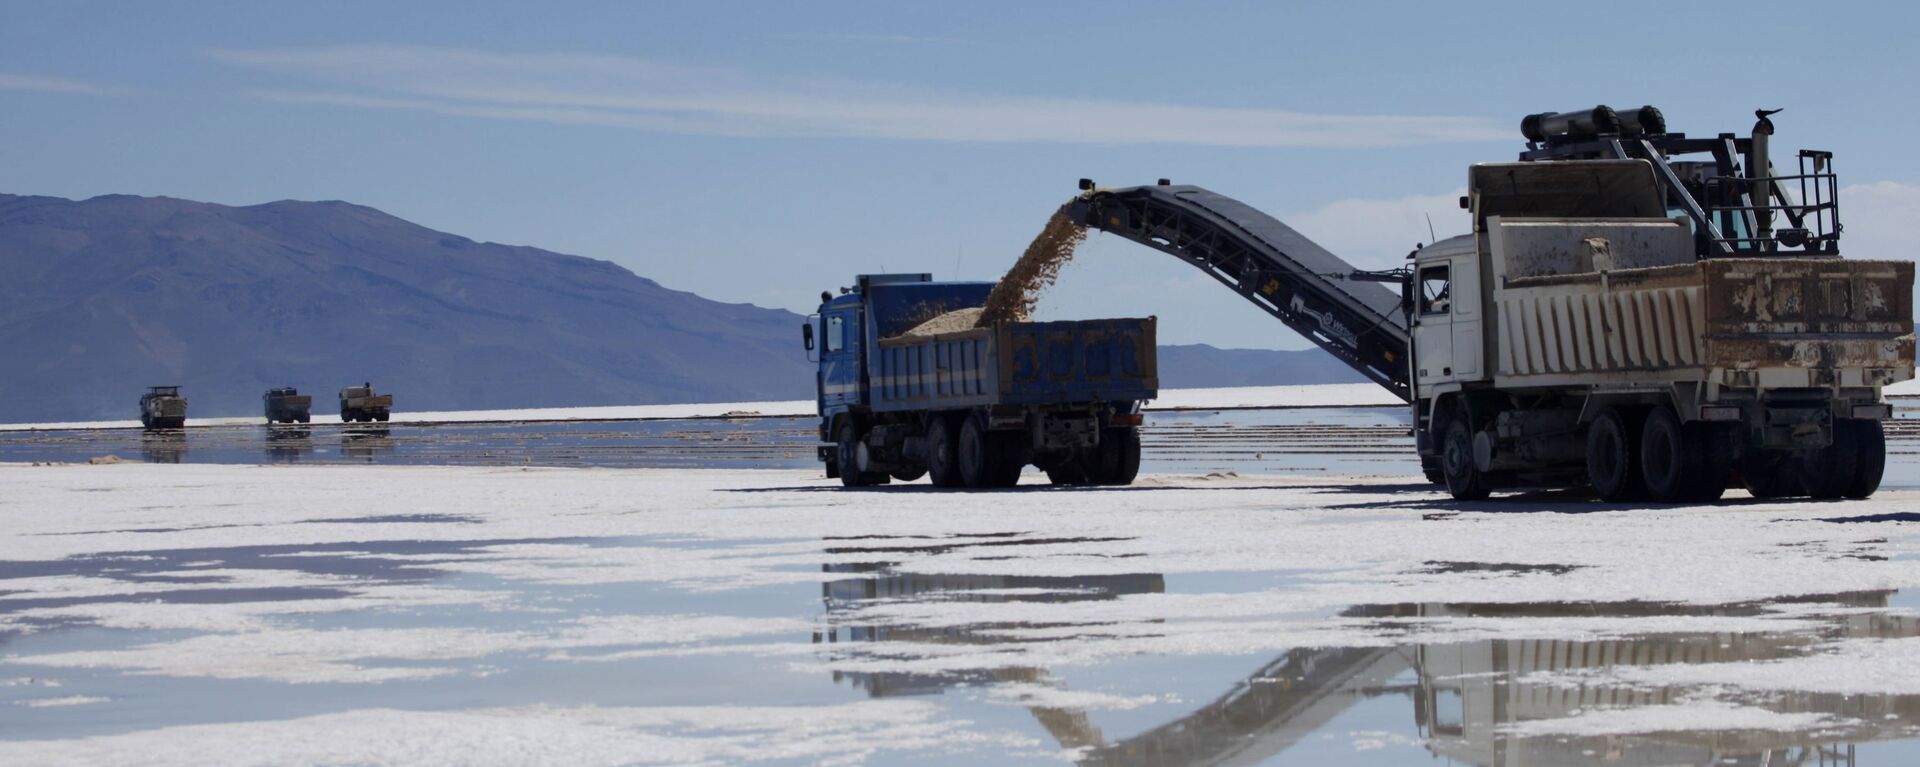 A track is loaded with salt at a semi-industrial plant to produce potassium chloride, used to manufacture batteries based on lithium, after its opening ceremony at the Uyuni salt desert, outskirts of Llipi, Bolivia, Thursday, Aug. 9, 2012. The salt flats of Uyuni have triggered international interest among energy companies due to its lithium reserves - Sputnik International, 1920, 25.02.2023